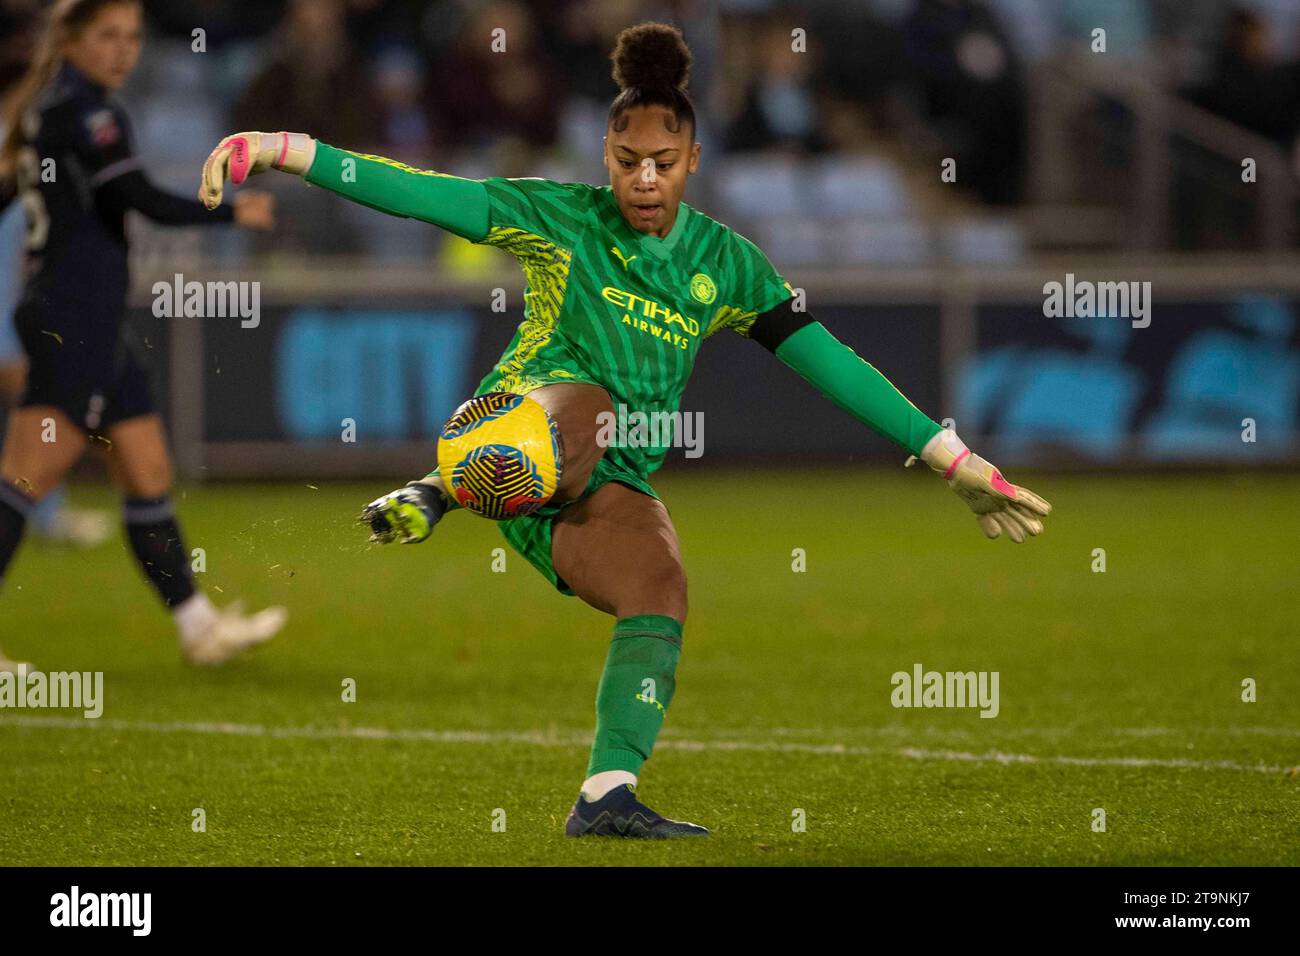 Manchester on Saturday 25th November 2023.Khiara Keating #35 (GK) of Manchester City in action during the Barclays FA Women's Super League match between Manchester City and Tottenham Hotspur at the Joie Stadium, Manchester on Saturday 25th November 2023. (Photo: Mike Morese | MI News) Credit: MI News & Sport /Alamy Live News Stock Photo